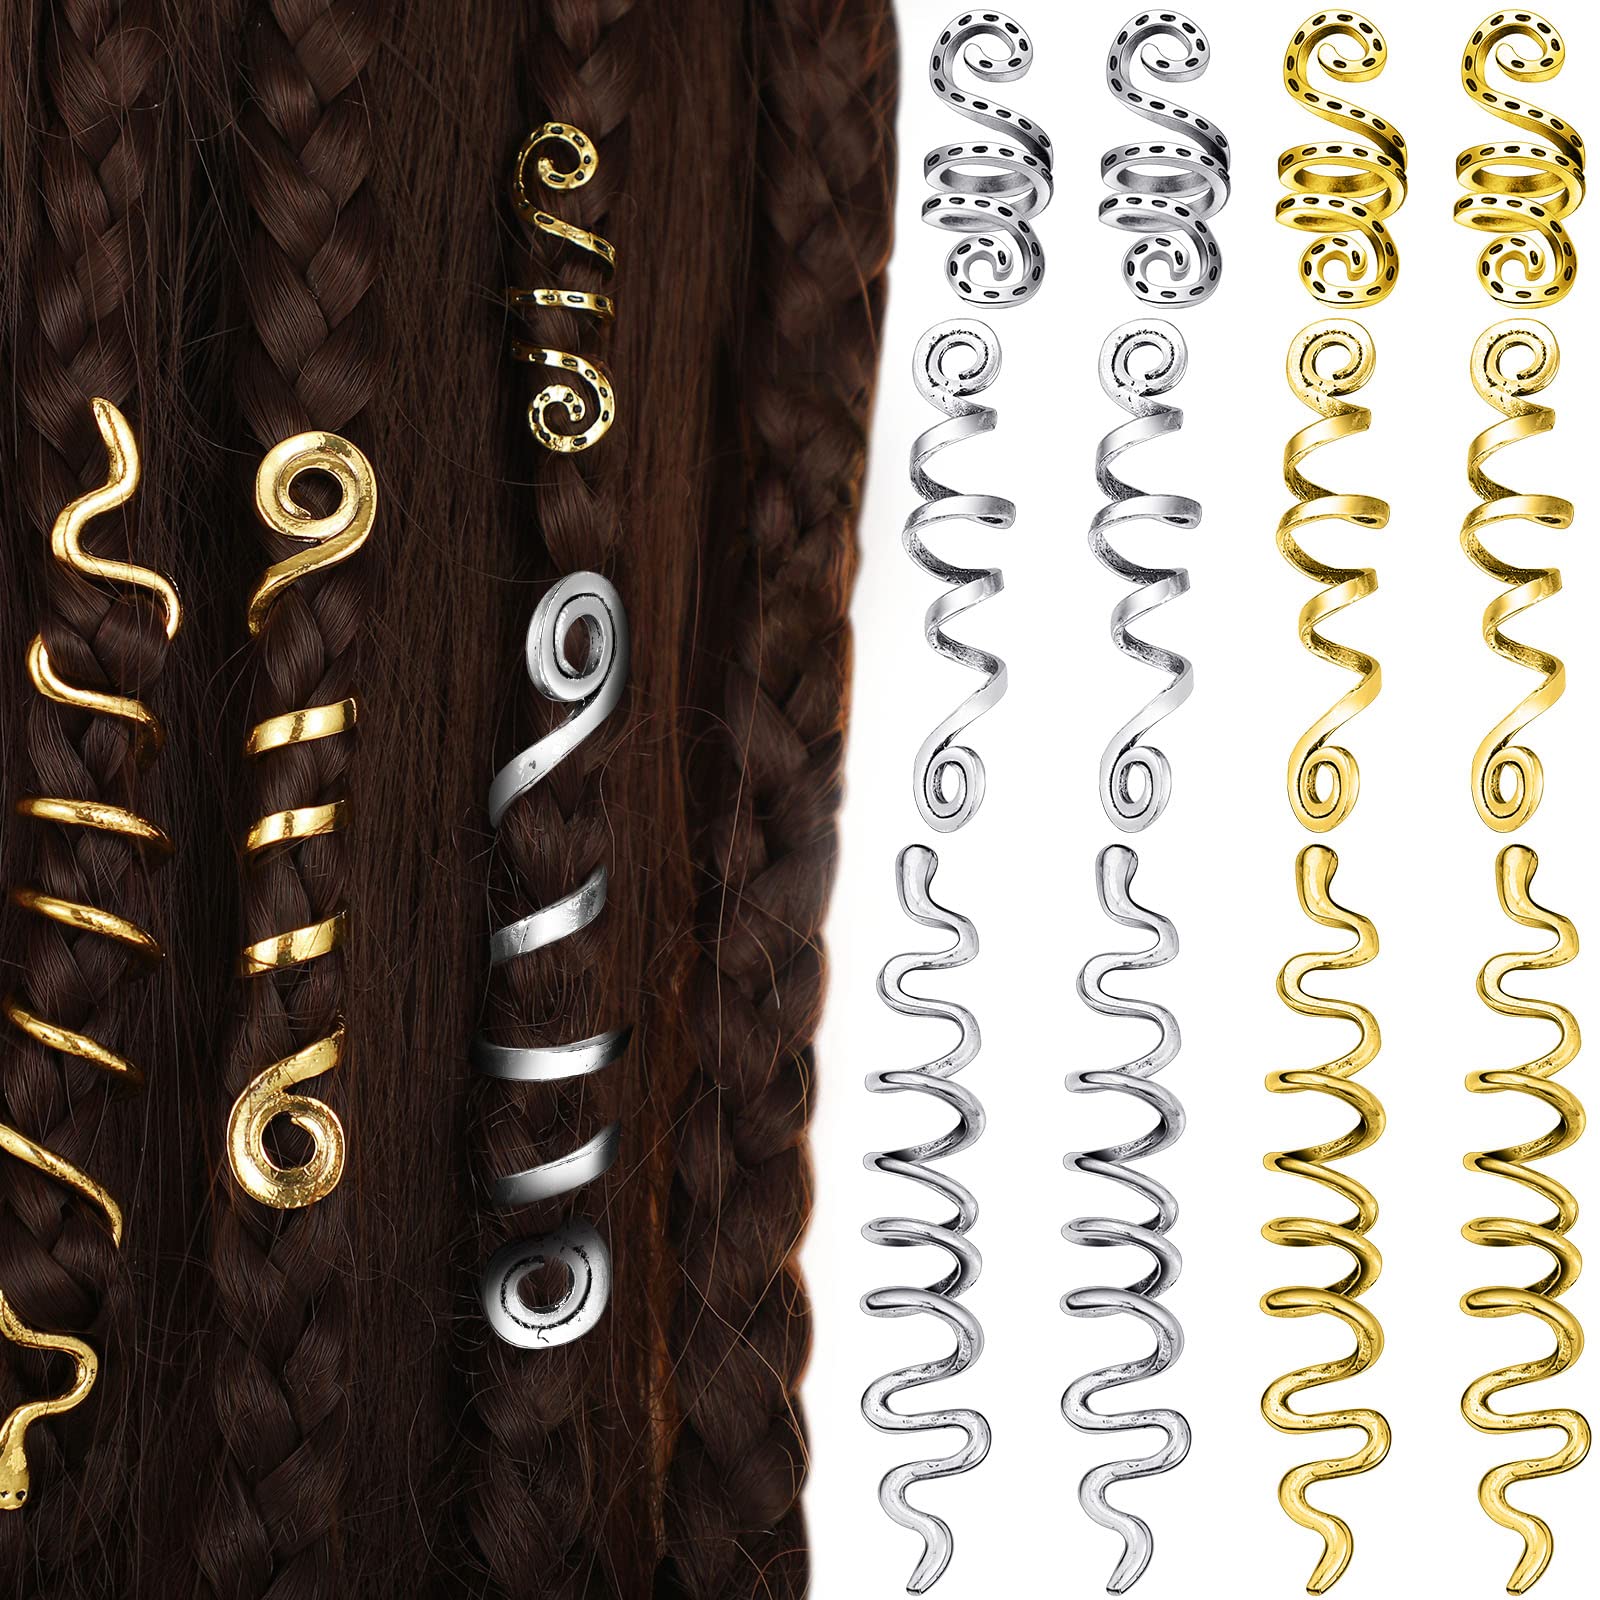  100 PCS Gold Hair Accessories Loc Hair Jewelry for